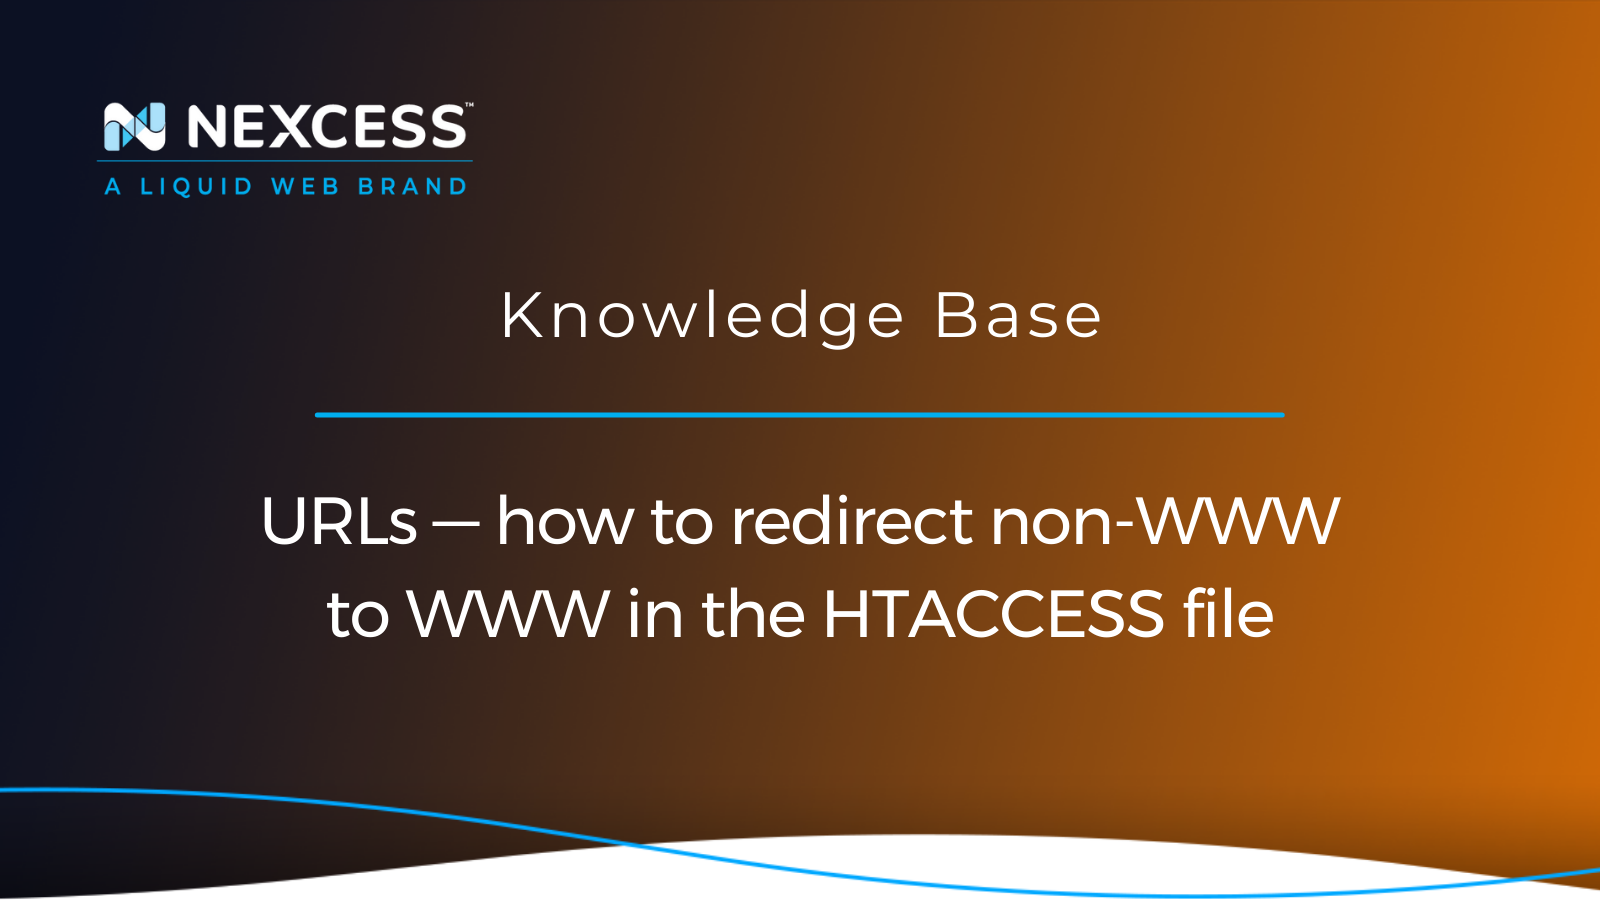 URLs — how to redirect non-WWW to WWW in the HTACCESS file